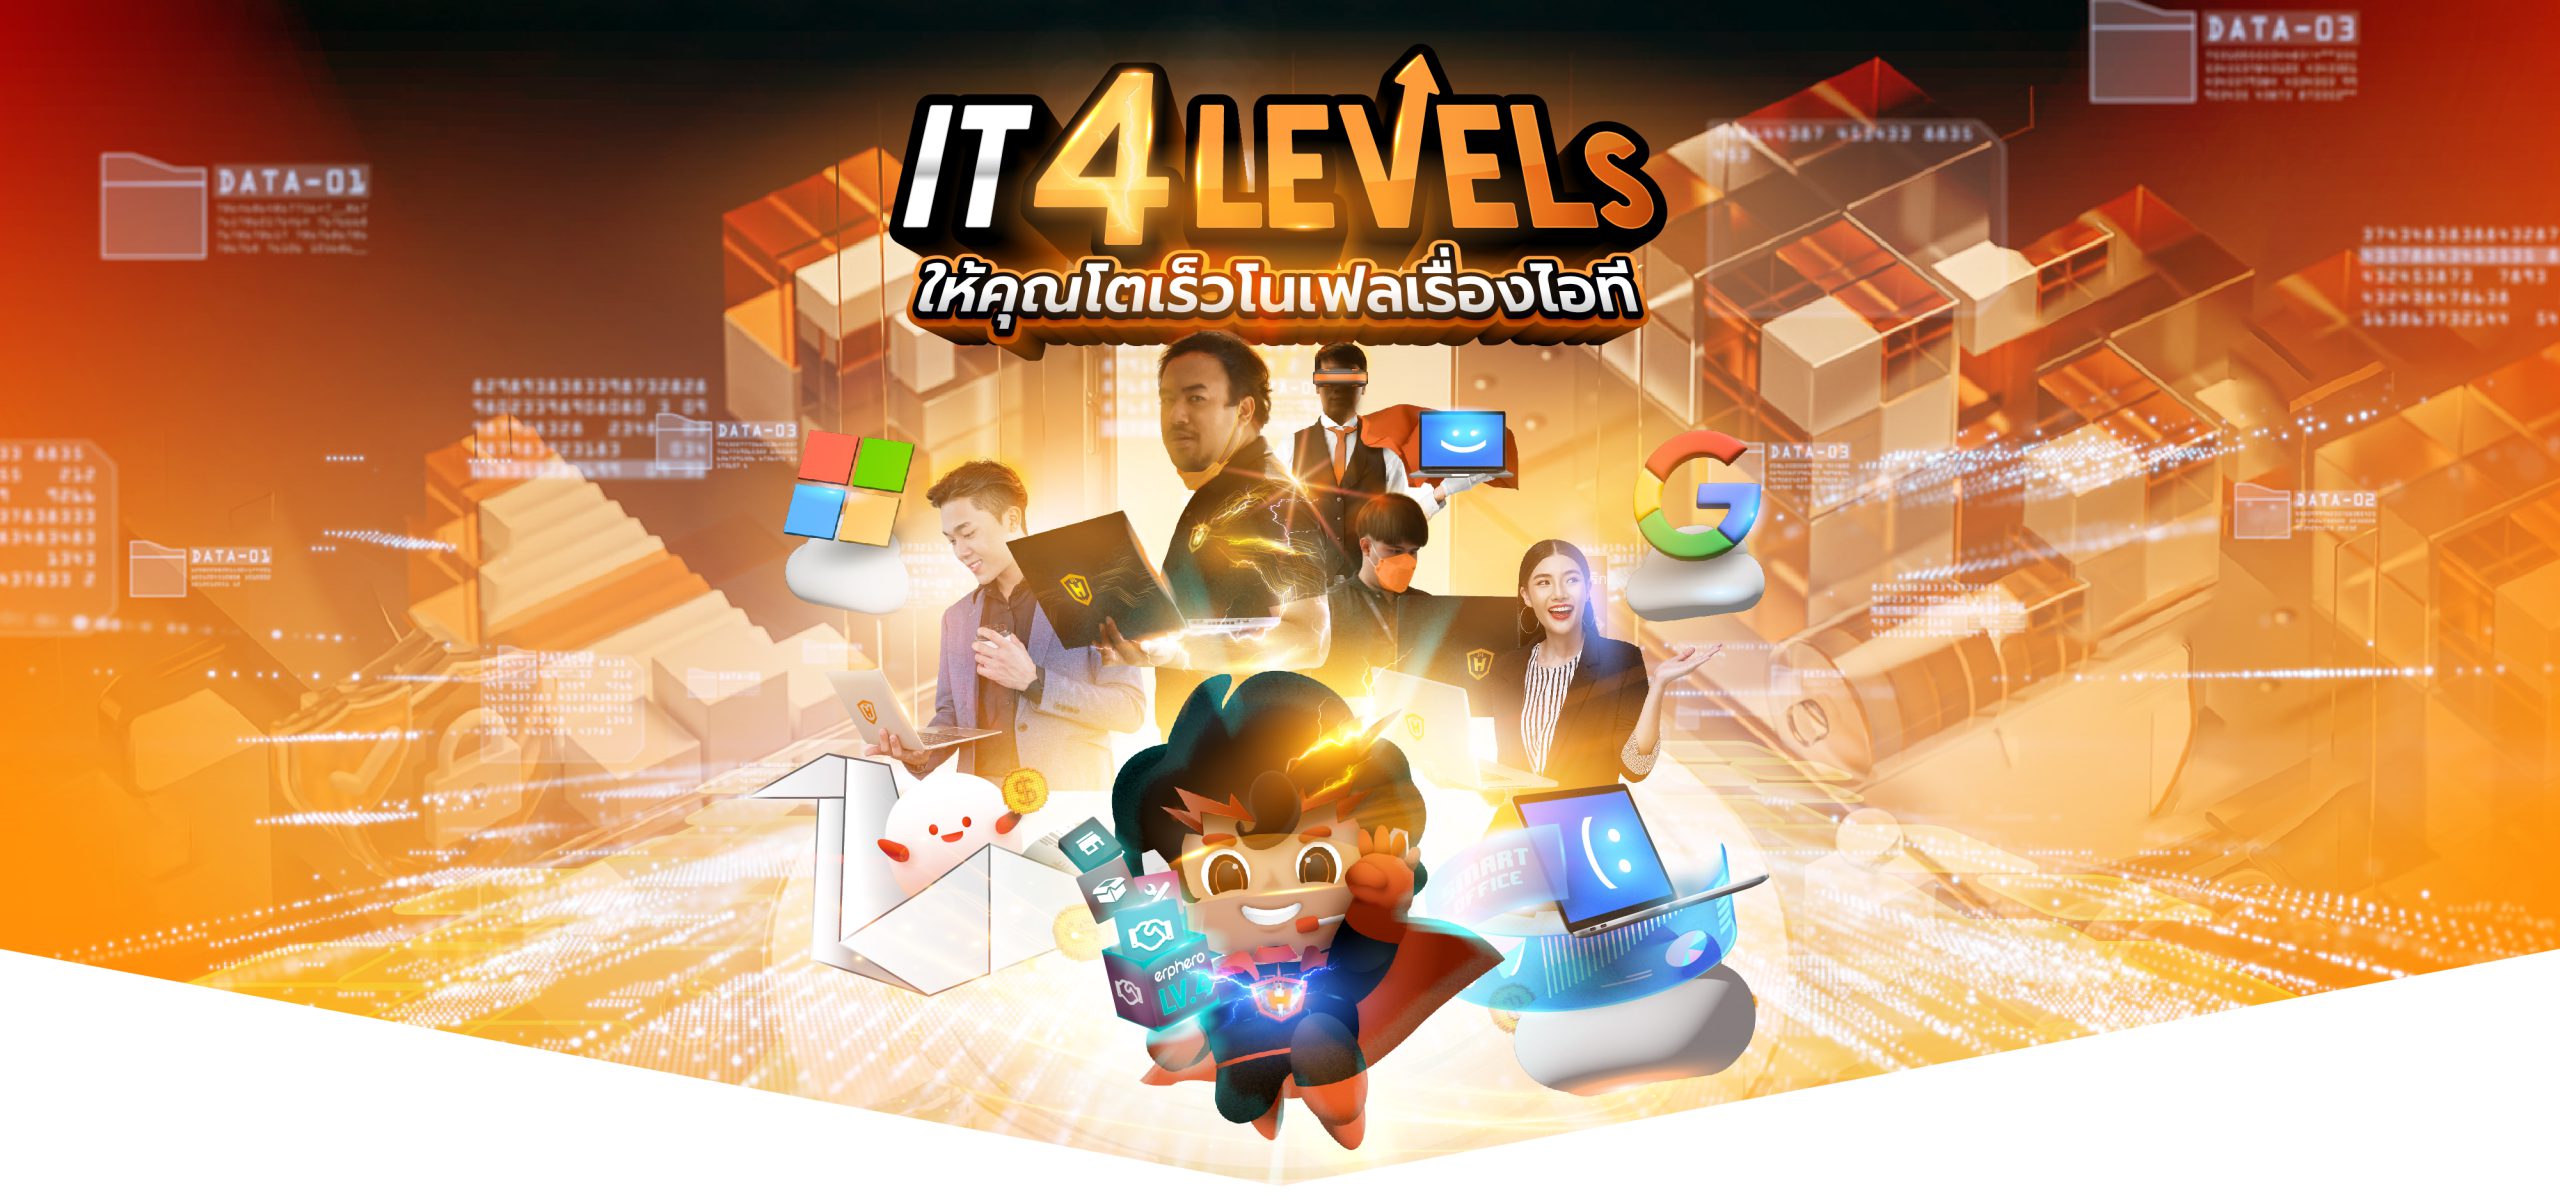 IT-Hero Campaign IT-4Levels for Business